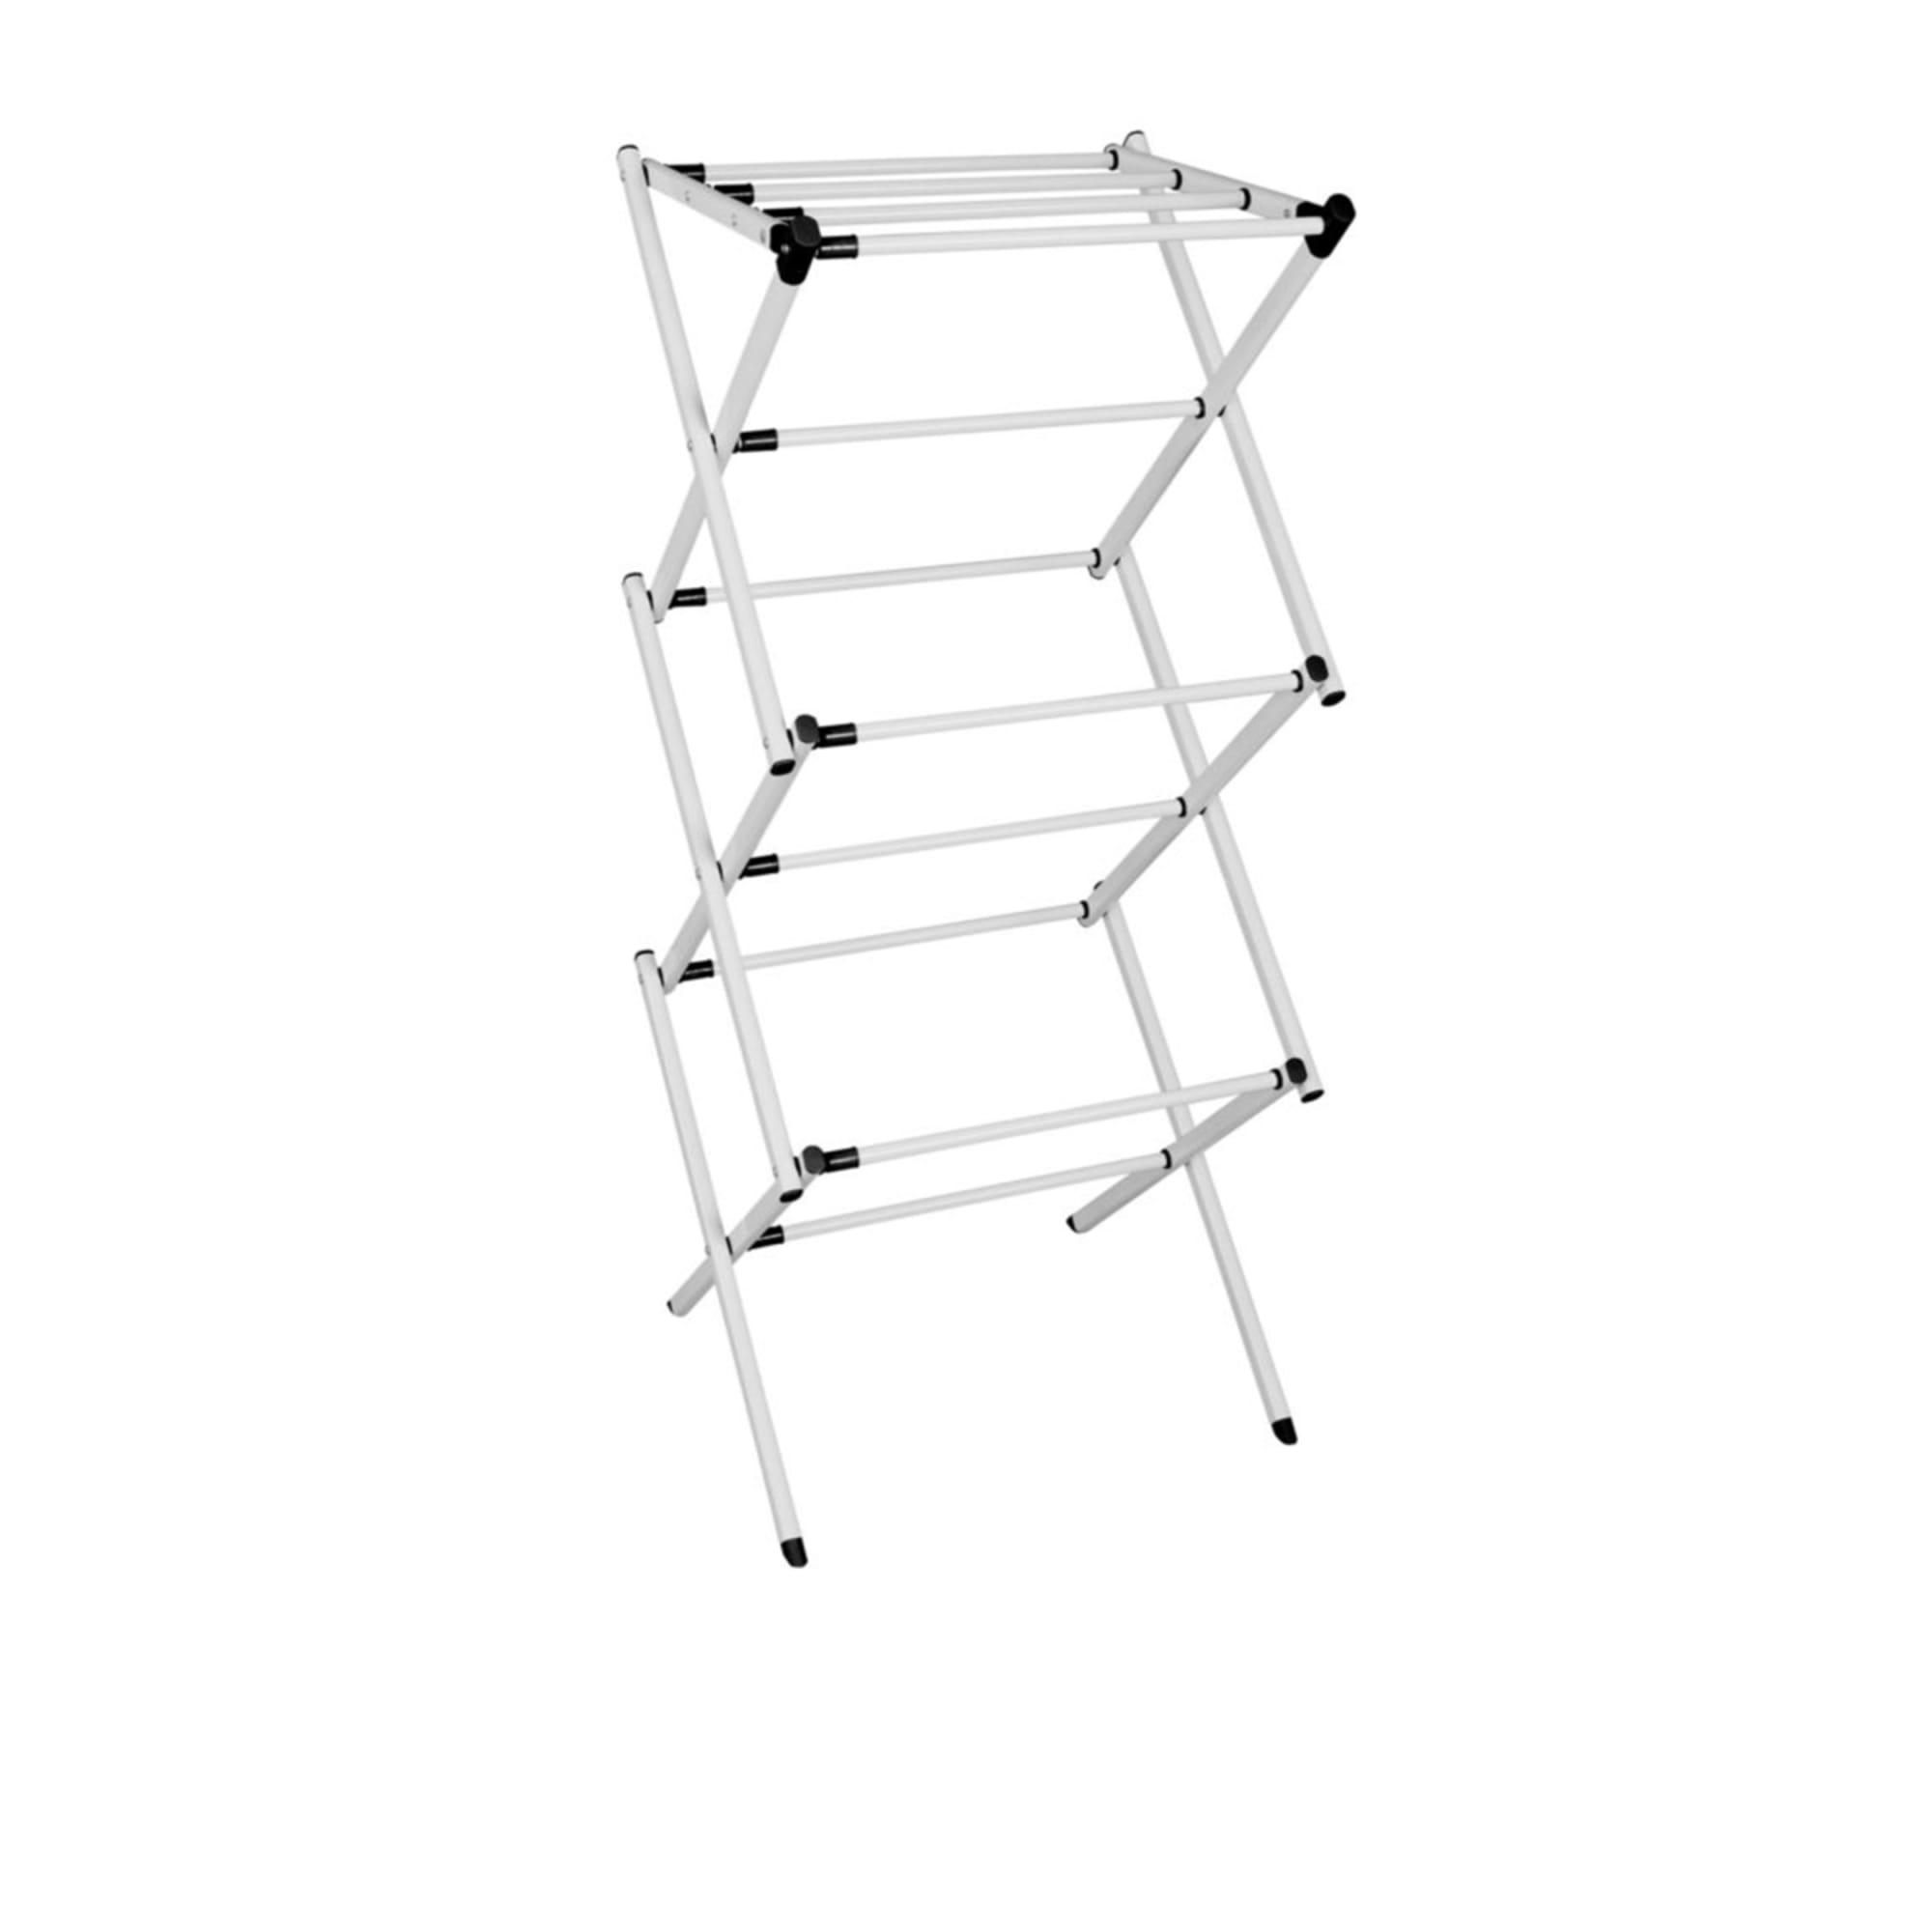 Butlers Suite 3 Tier Expanding Drying Rack White Image 3